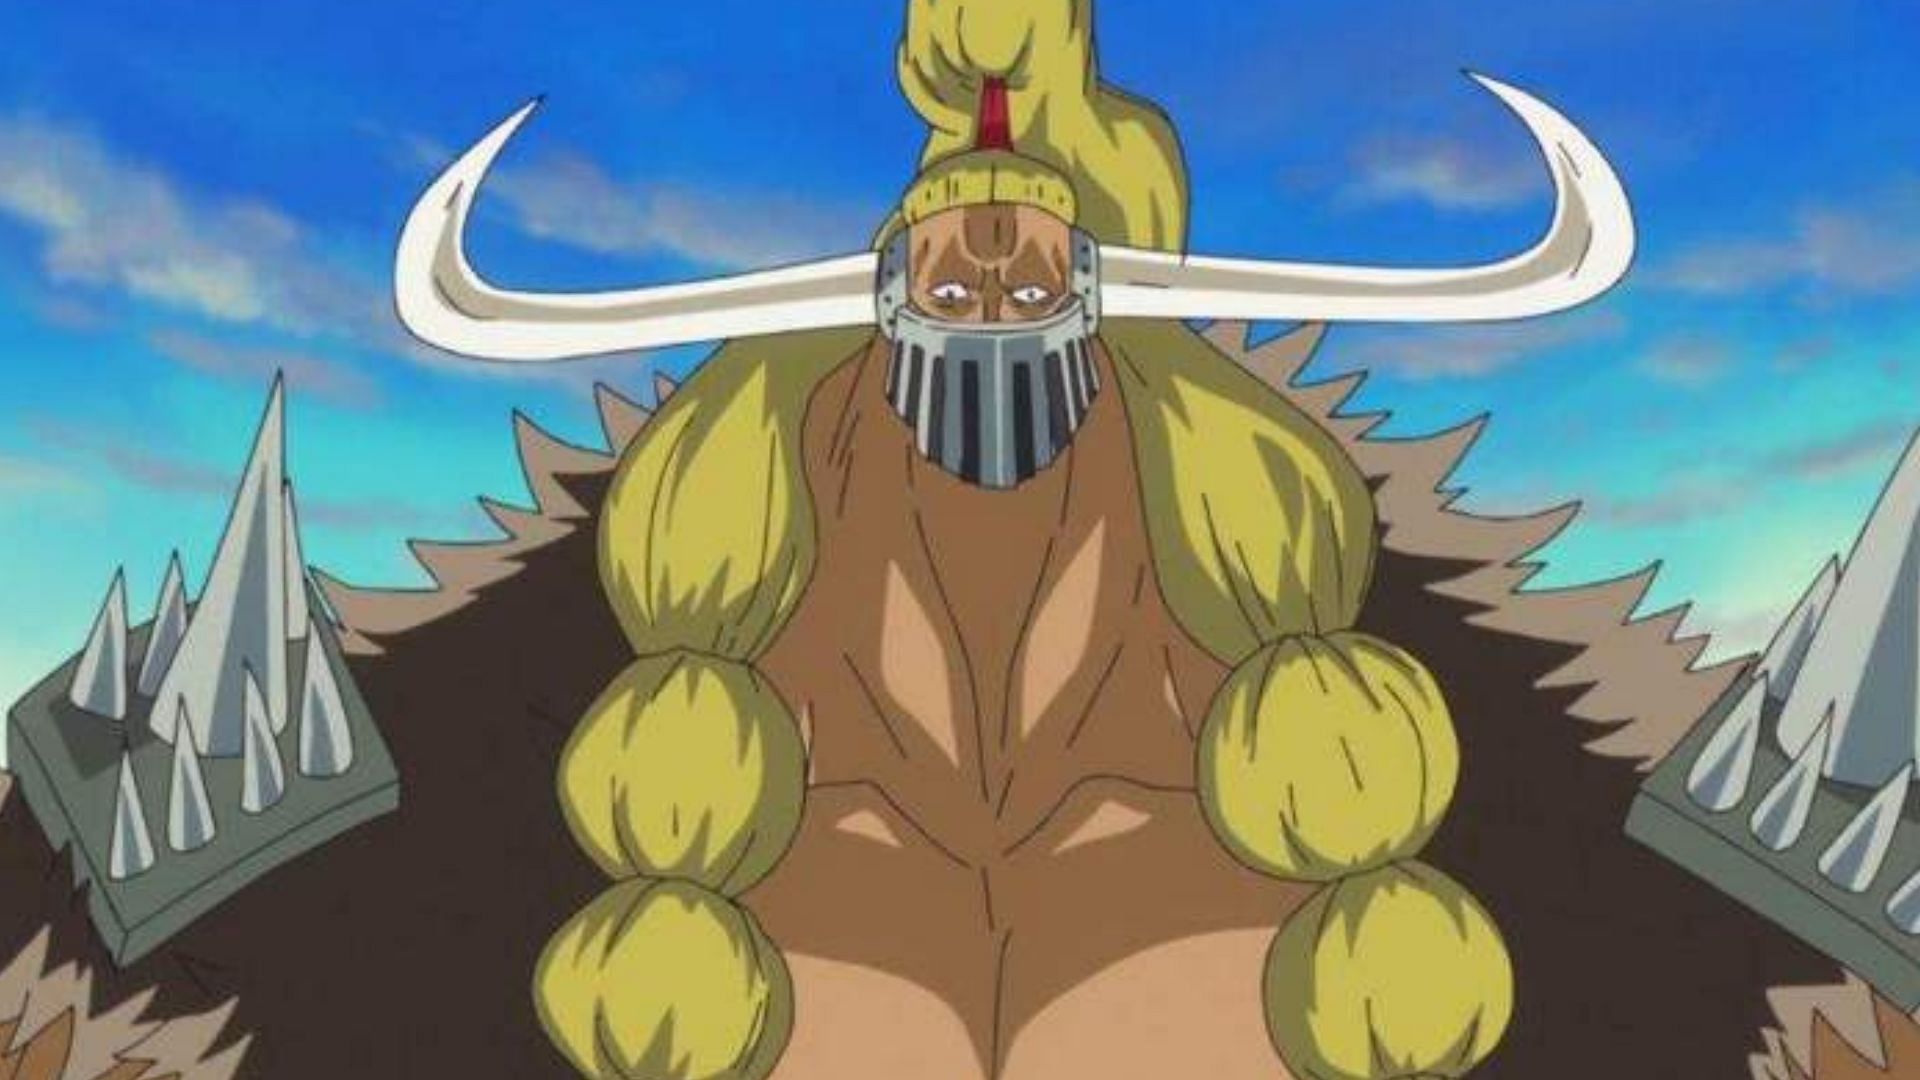 Jack in the One Piece anime (Image via TOEI Animation)